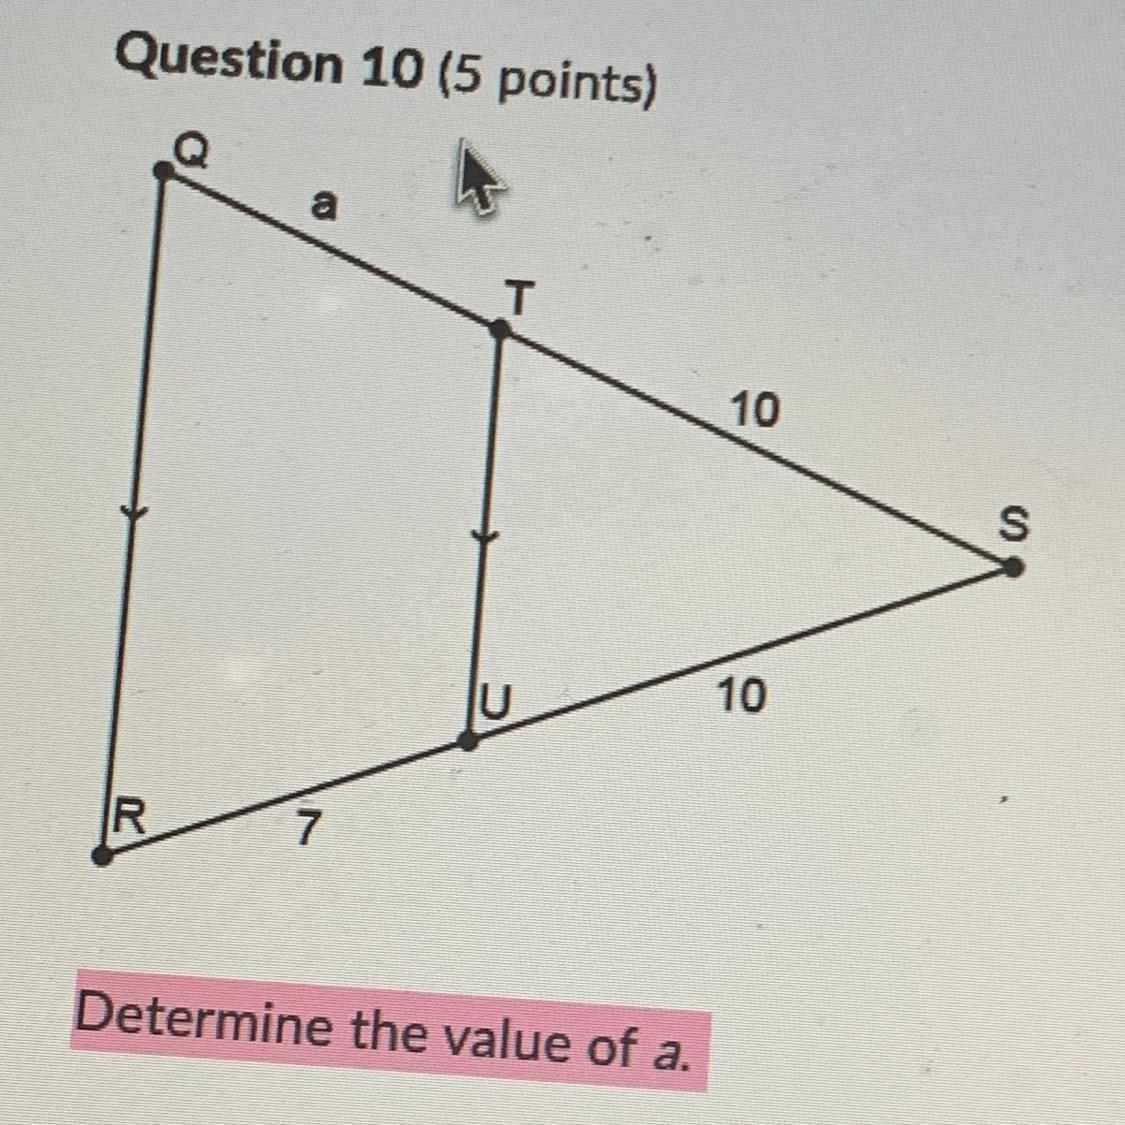 Determine The Value Of A.Question 10 Options:A) 6B) 10C) 70D) 7